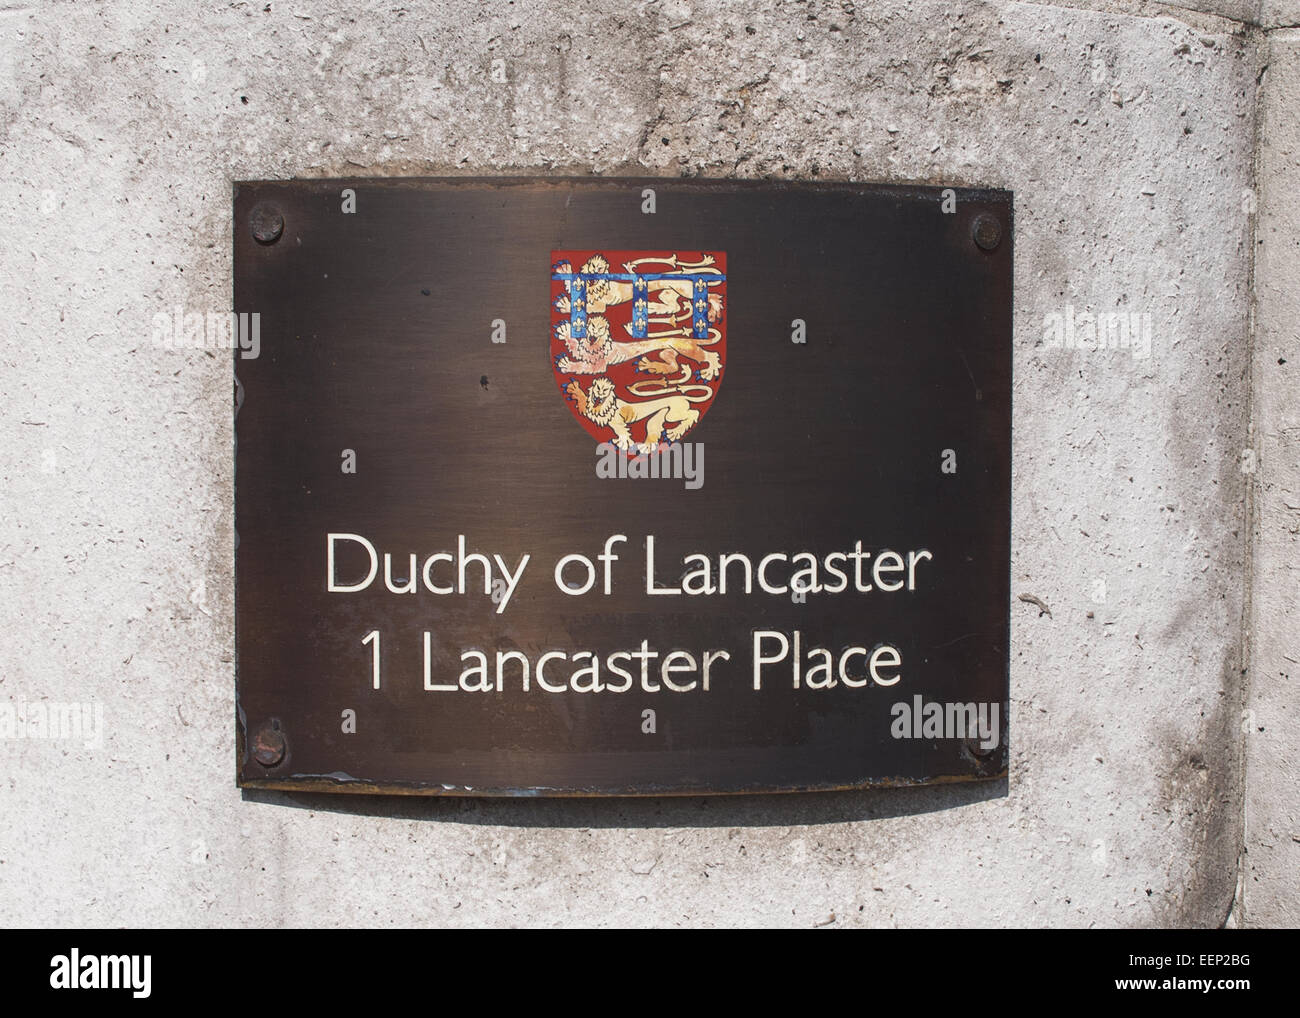 Duchy of Lancaster Building Sign Stock Photo